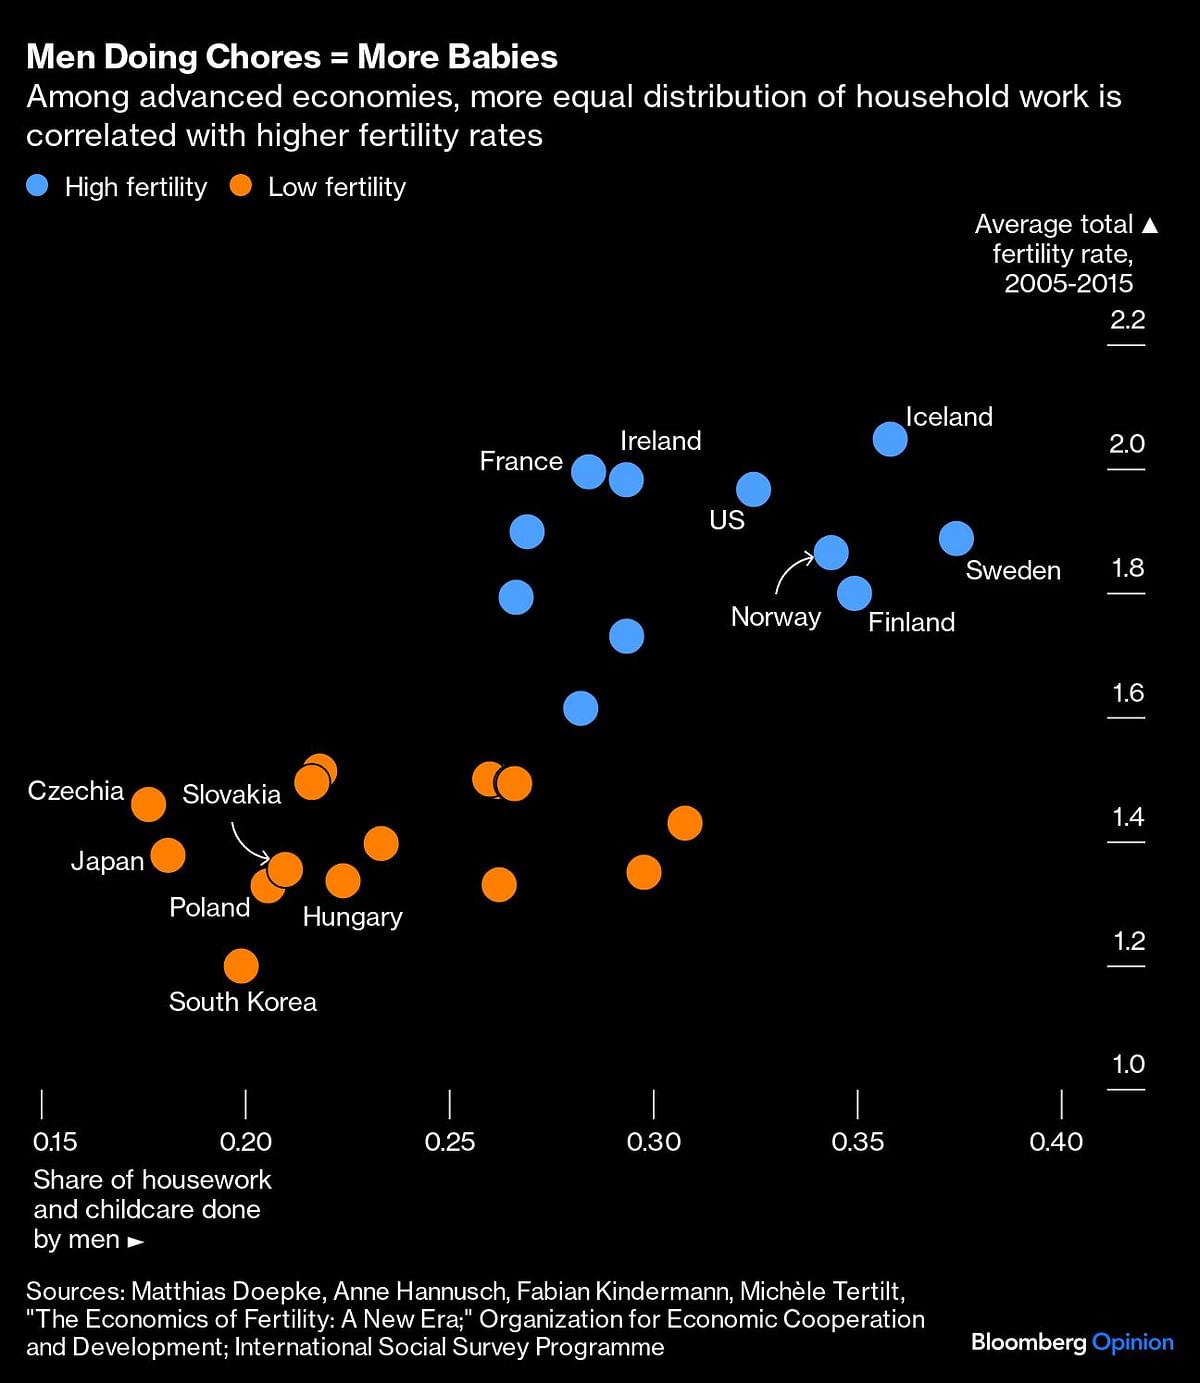 Household work's correlation with fertility rates.